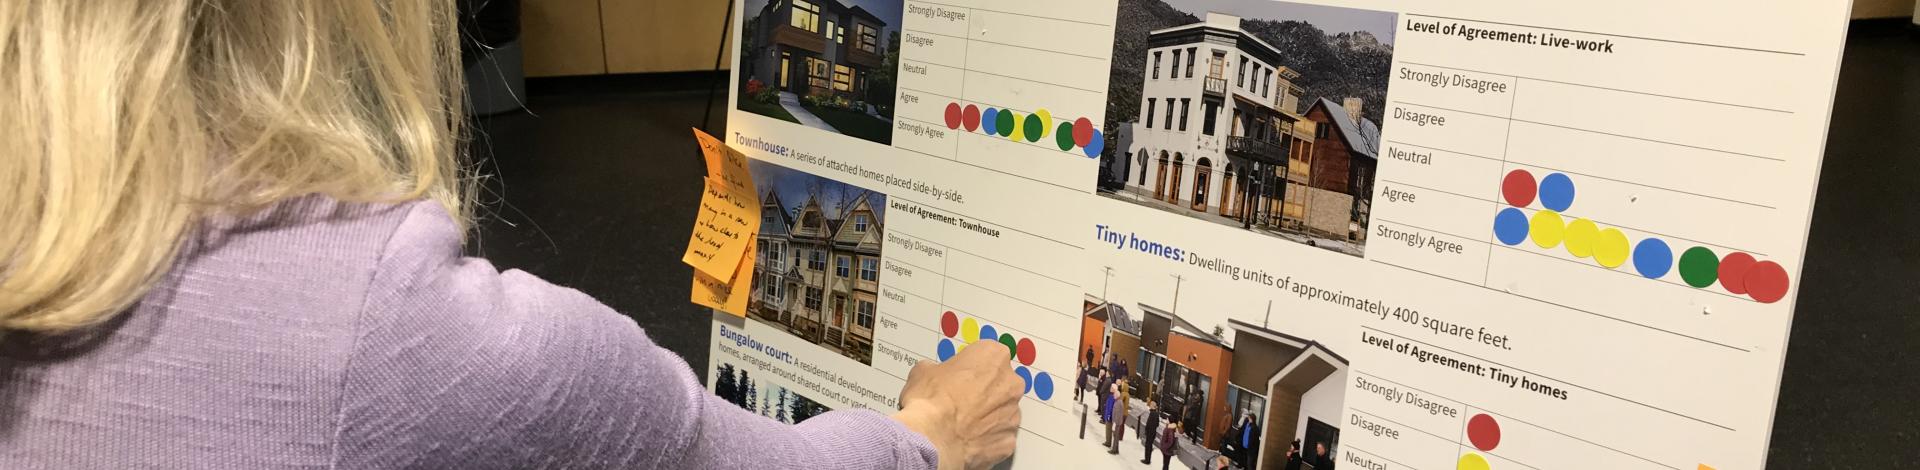 woman participating in public engagement on types of housing as part of Municipal Development Planning